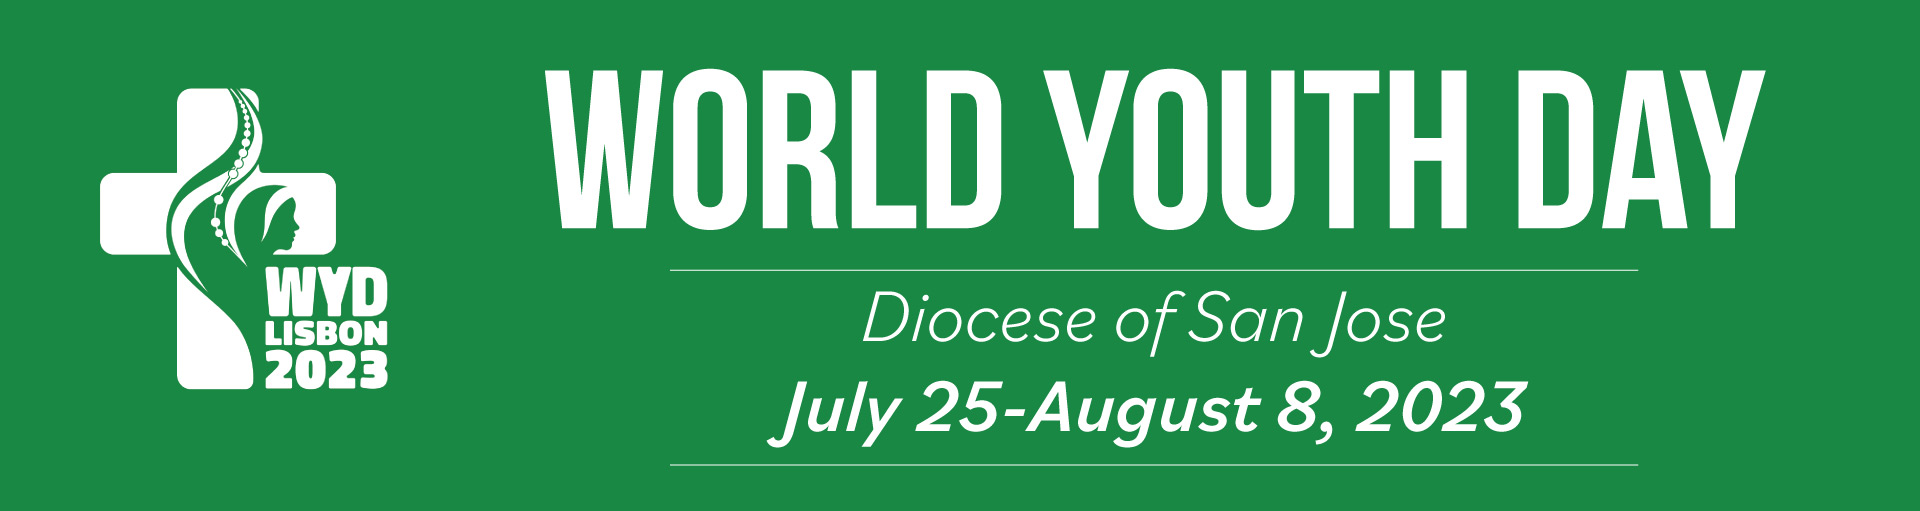 World Youth Day Diocese of San Jose